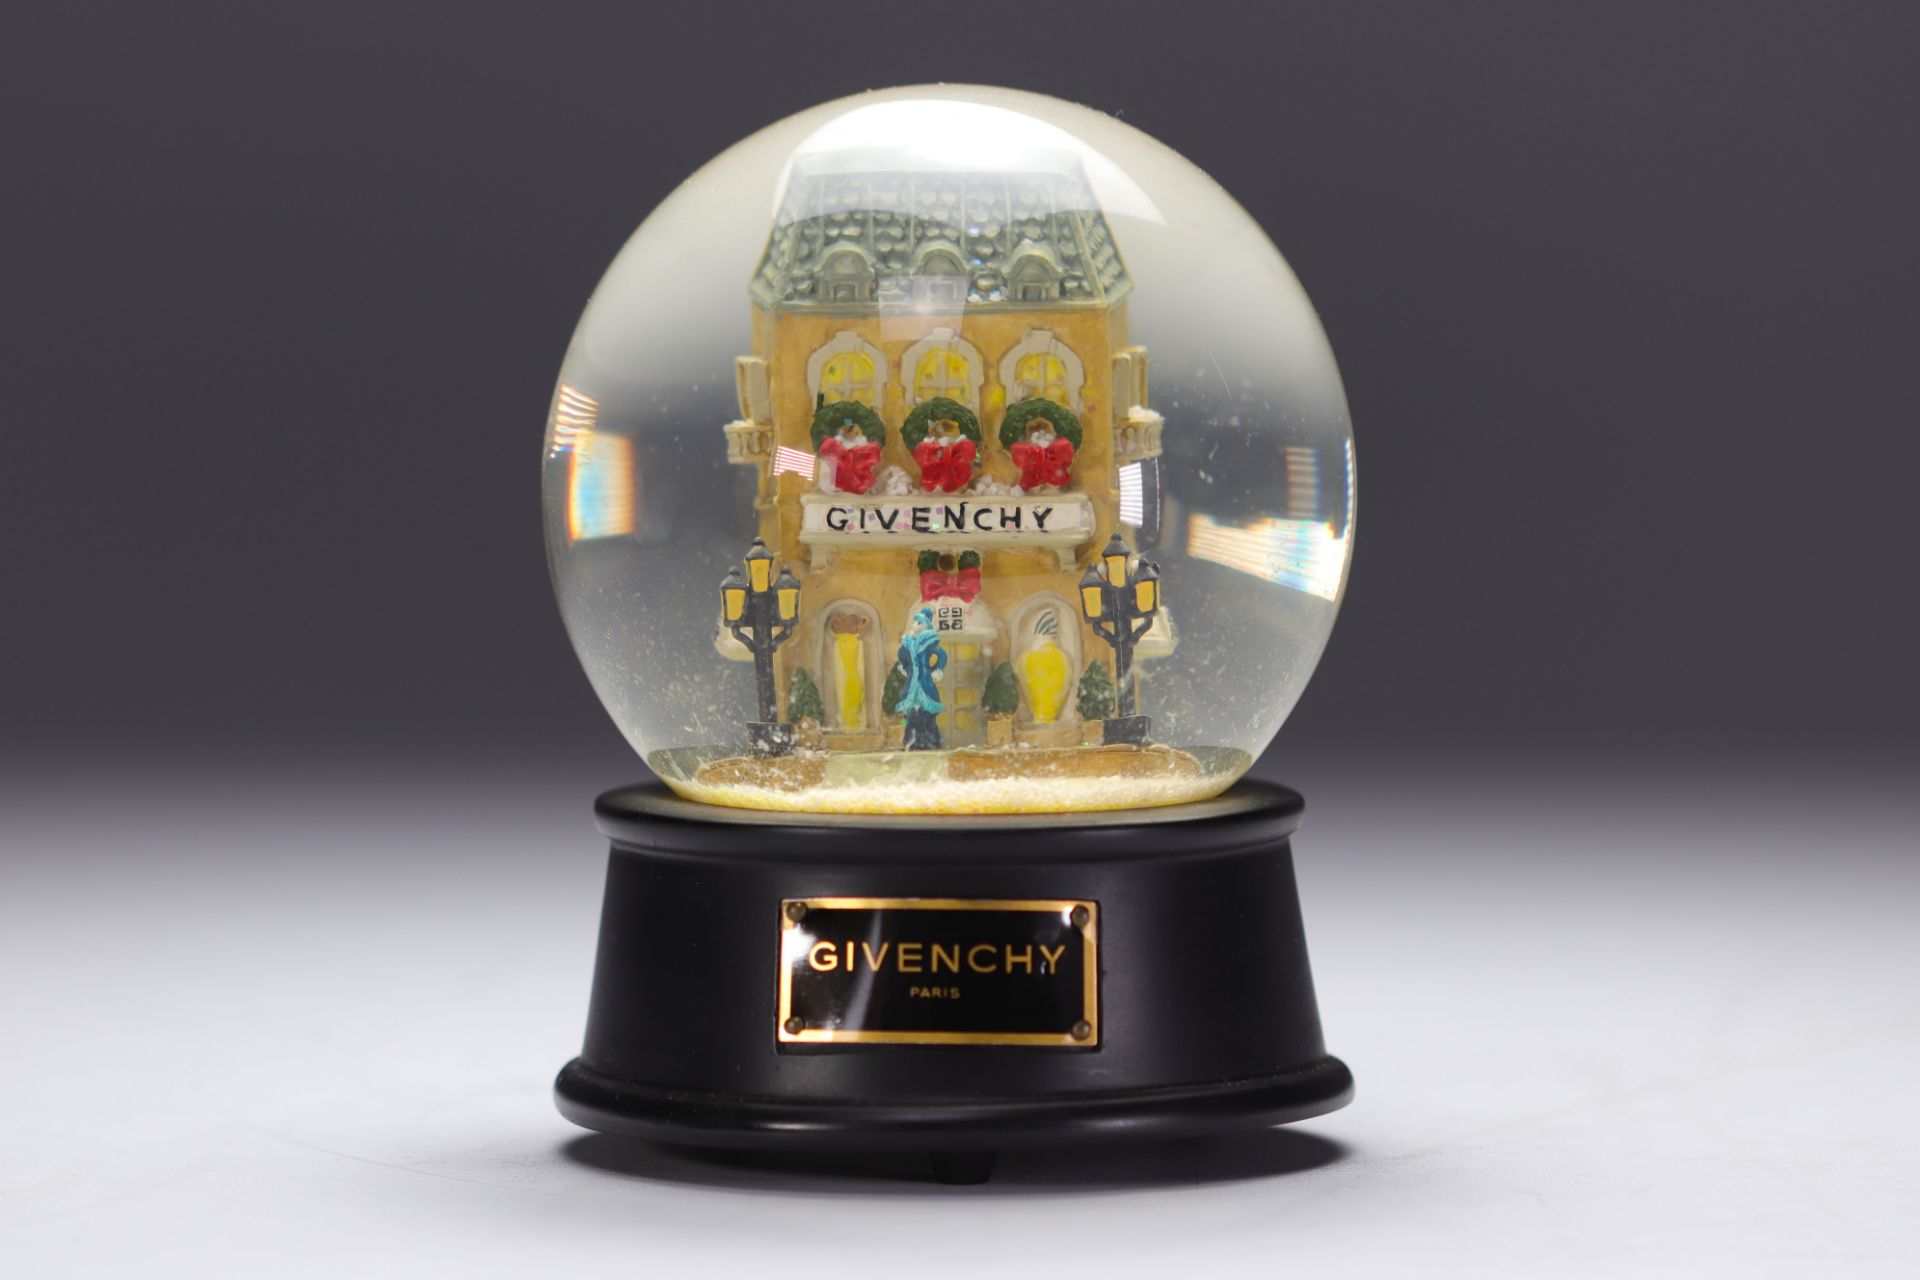 Givenchy. Musical snow globe decorated with the Parisian boutique animated by characters and a Rolls